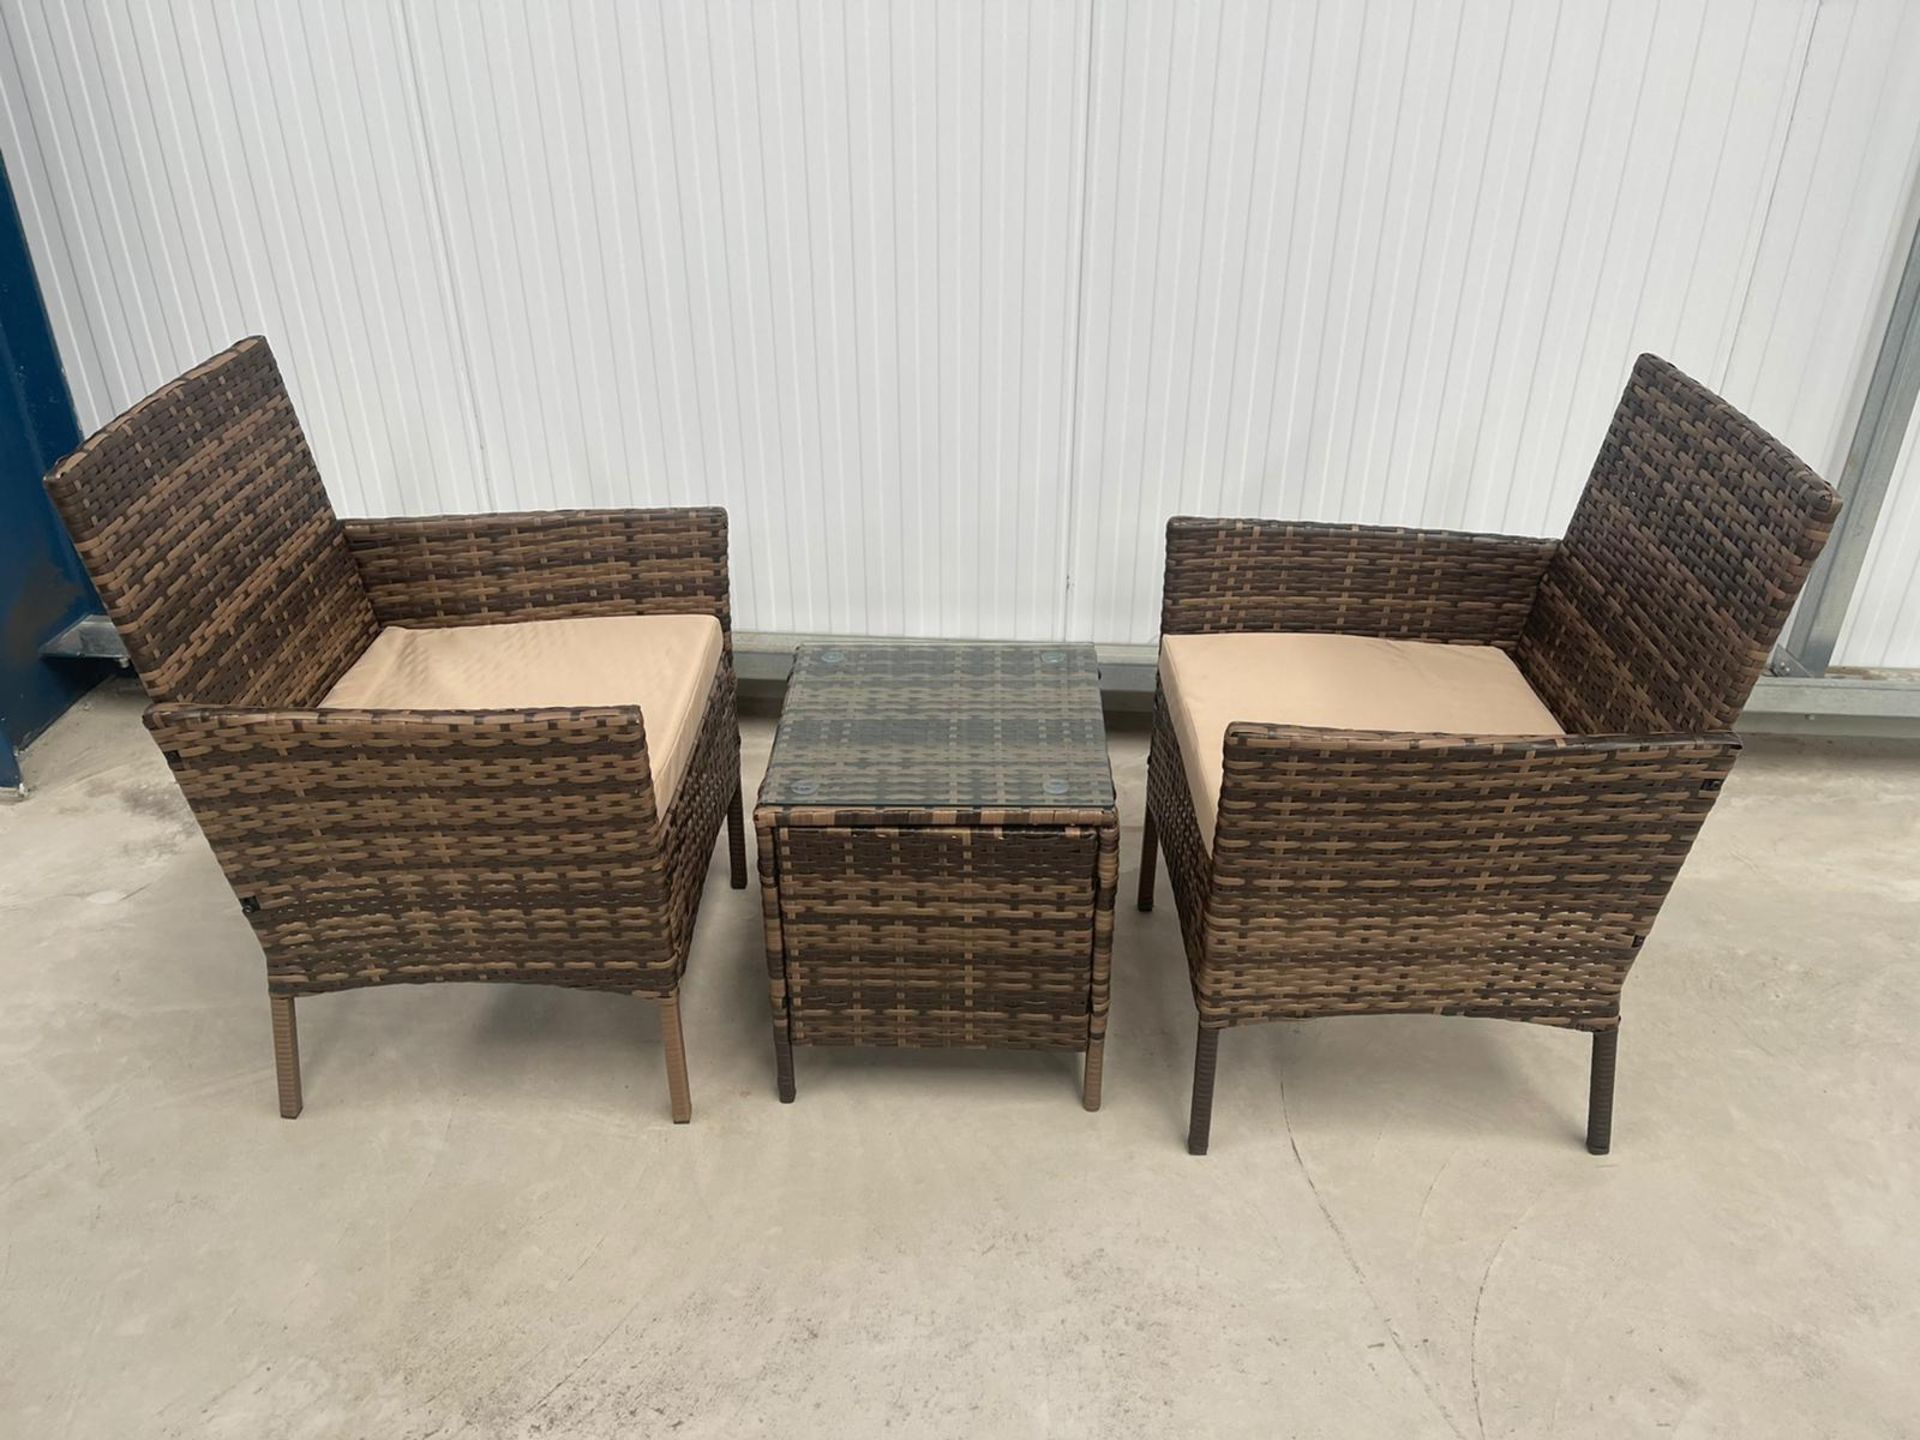 RRP £199 - NEW BROWN BISTRO SET. TABLE 40 X 40 X 45CM, CHAIR 52 X 56 X 83CM - Image 2 of 4